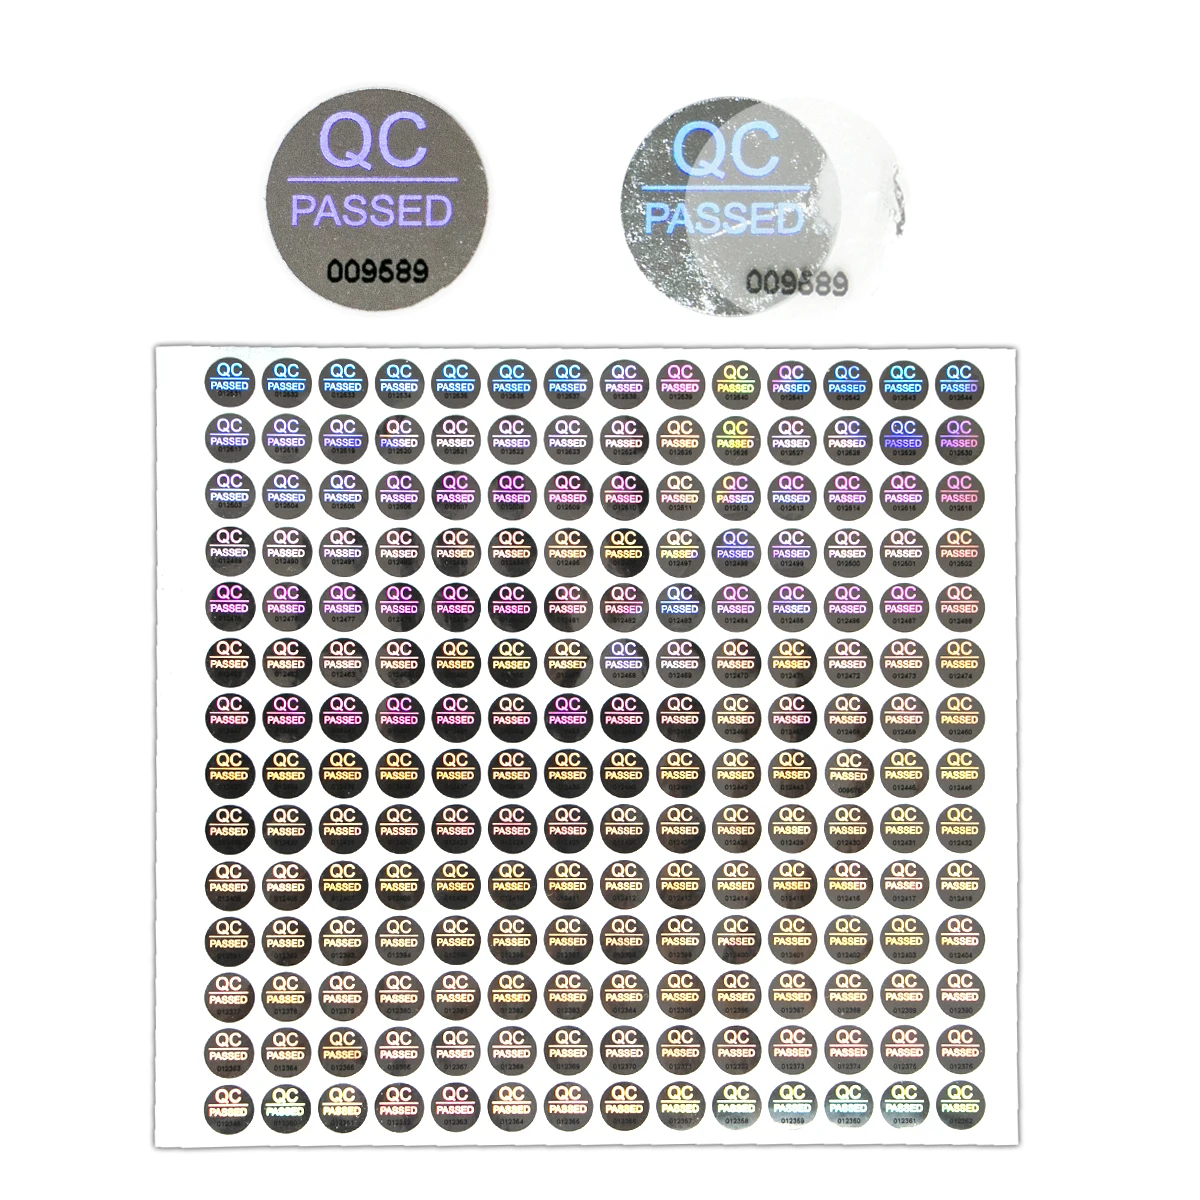 Silver High Security seals Tamper Evident sticker Warranty Void QC Passed labels Hologram stickers with Unique Serial Numbering